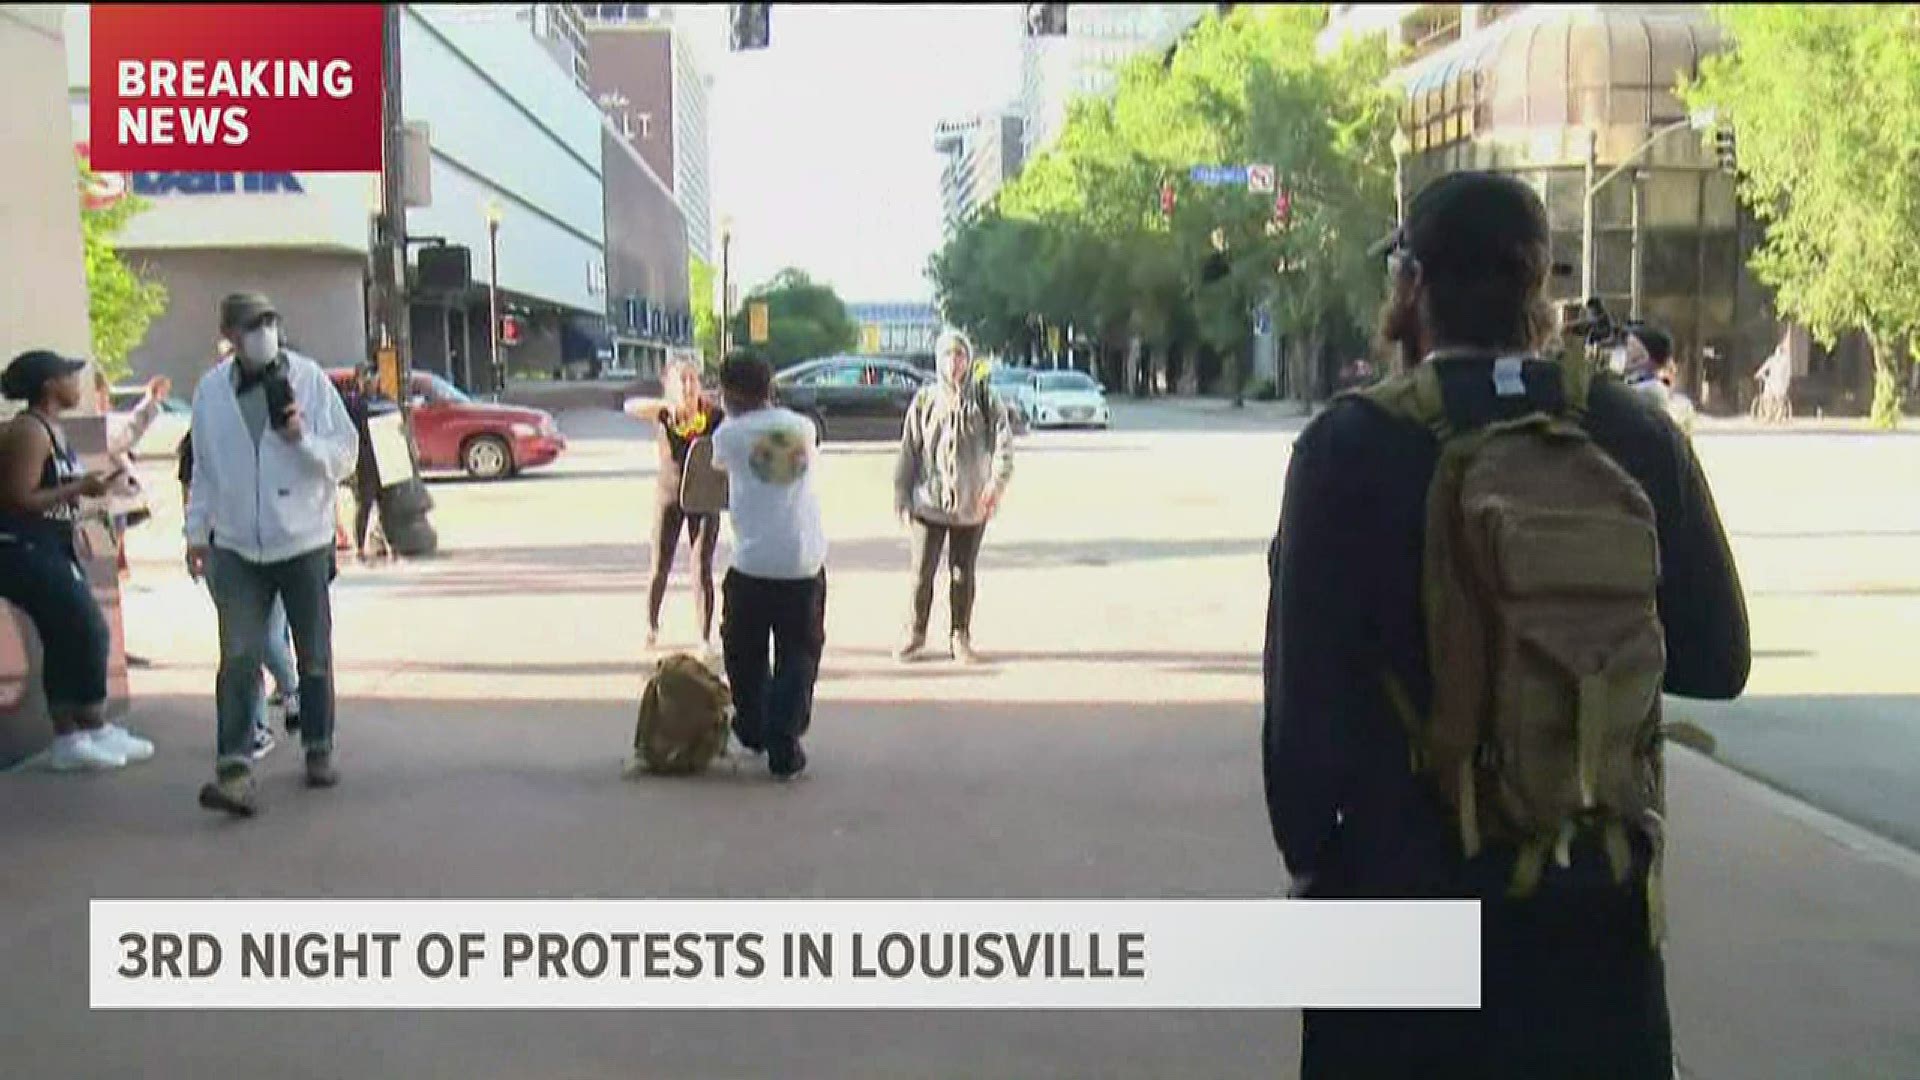 Protesters who are protesting in wake of the Breonna Taylor shooting explain why they're protesting peacefully in downtown Louisville.